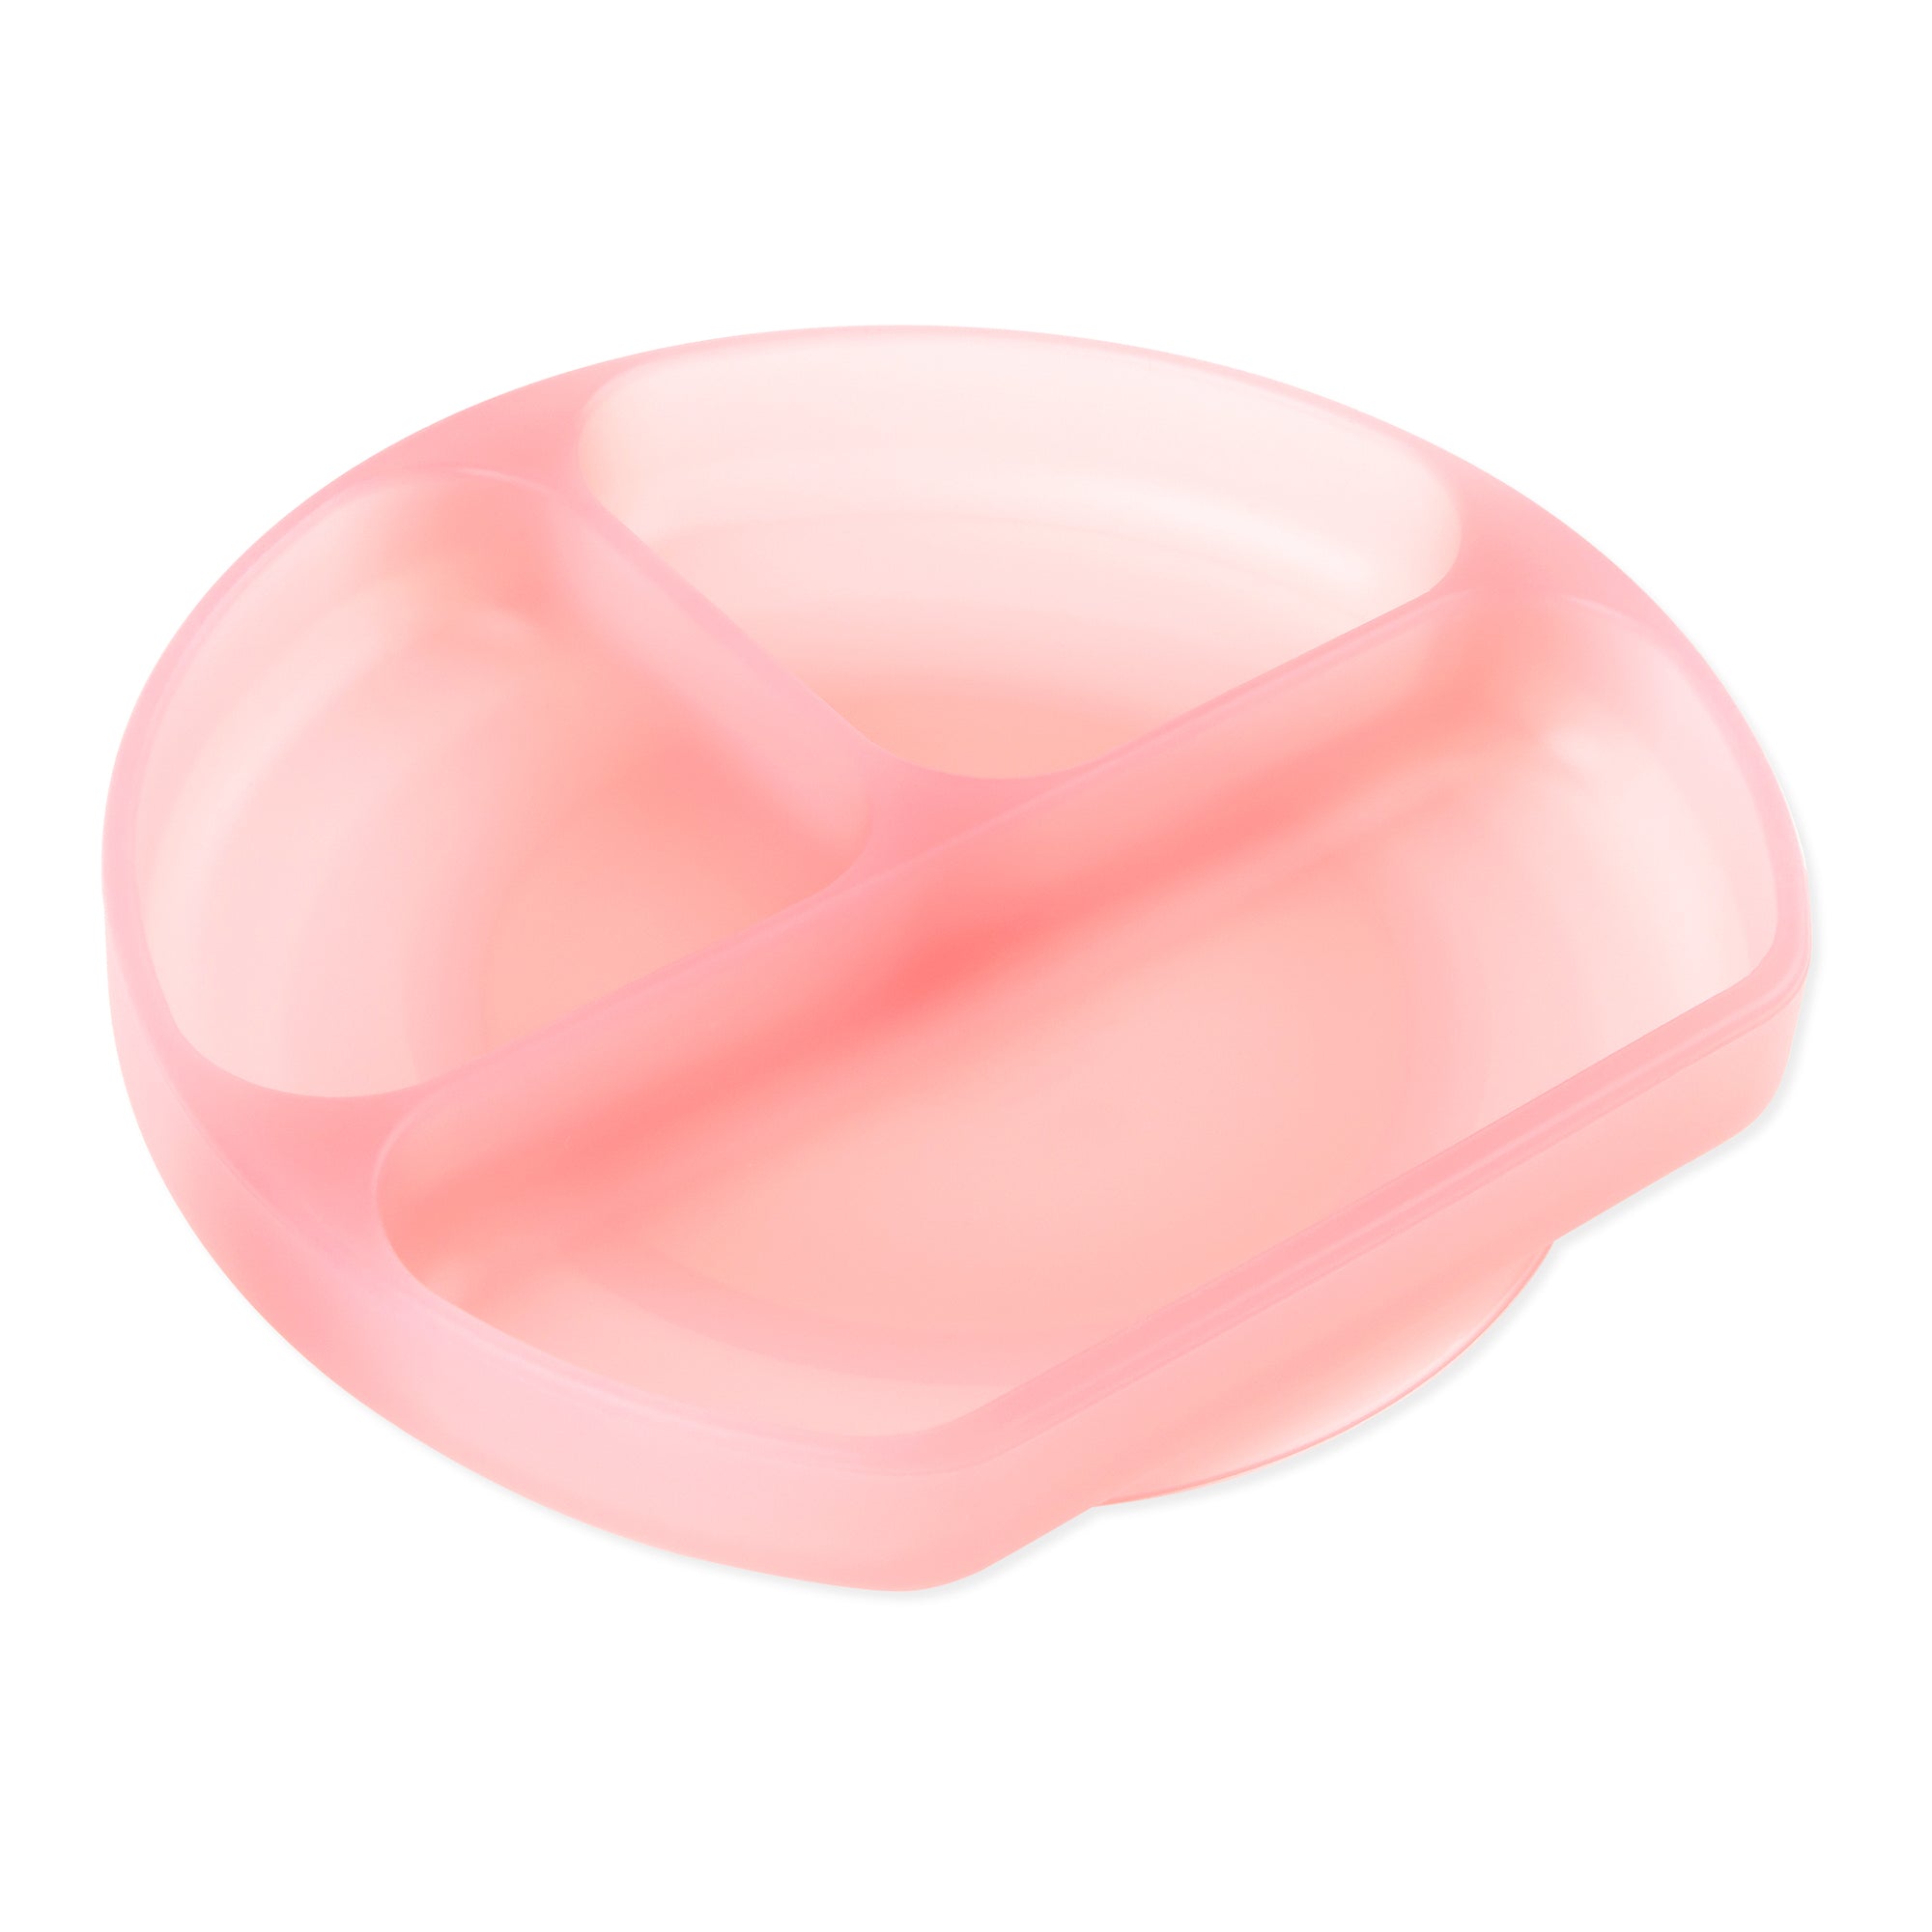 Silicone Grip Dish: Pink Jelly